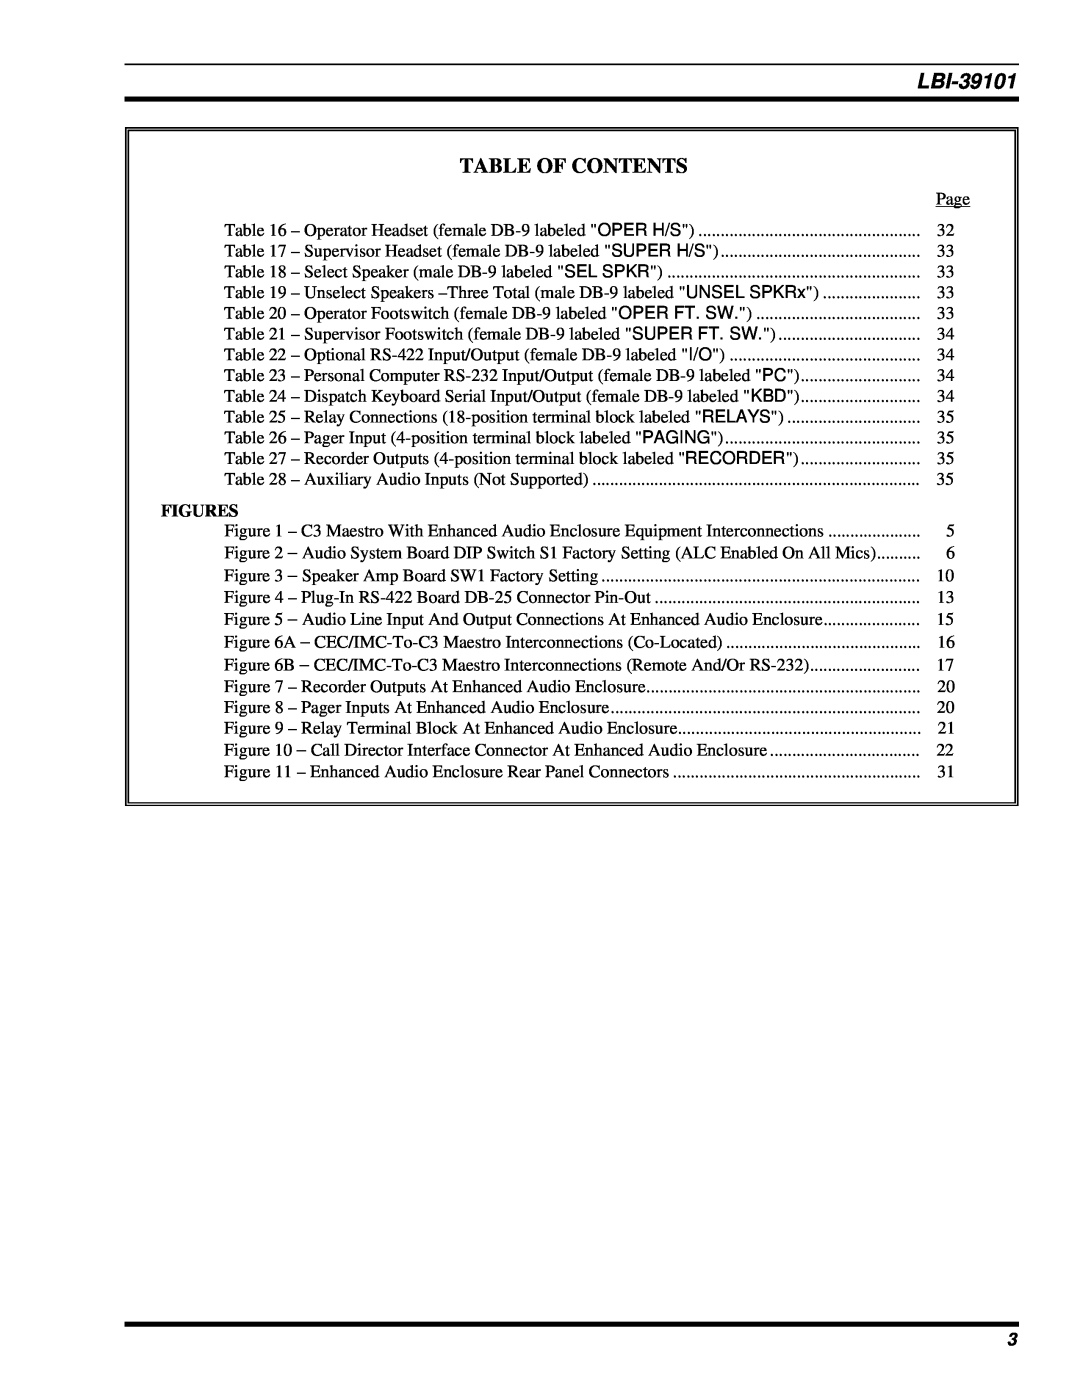 Ericsson LBI-39101A manual Table Of Contents, Figures 